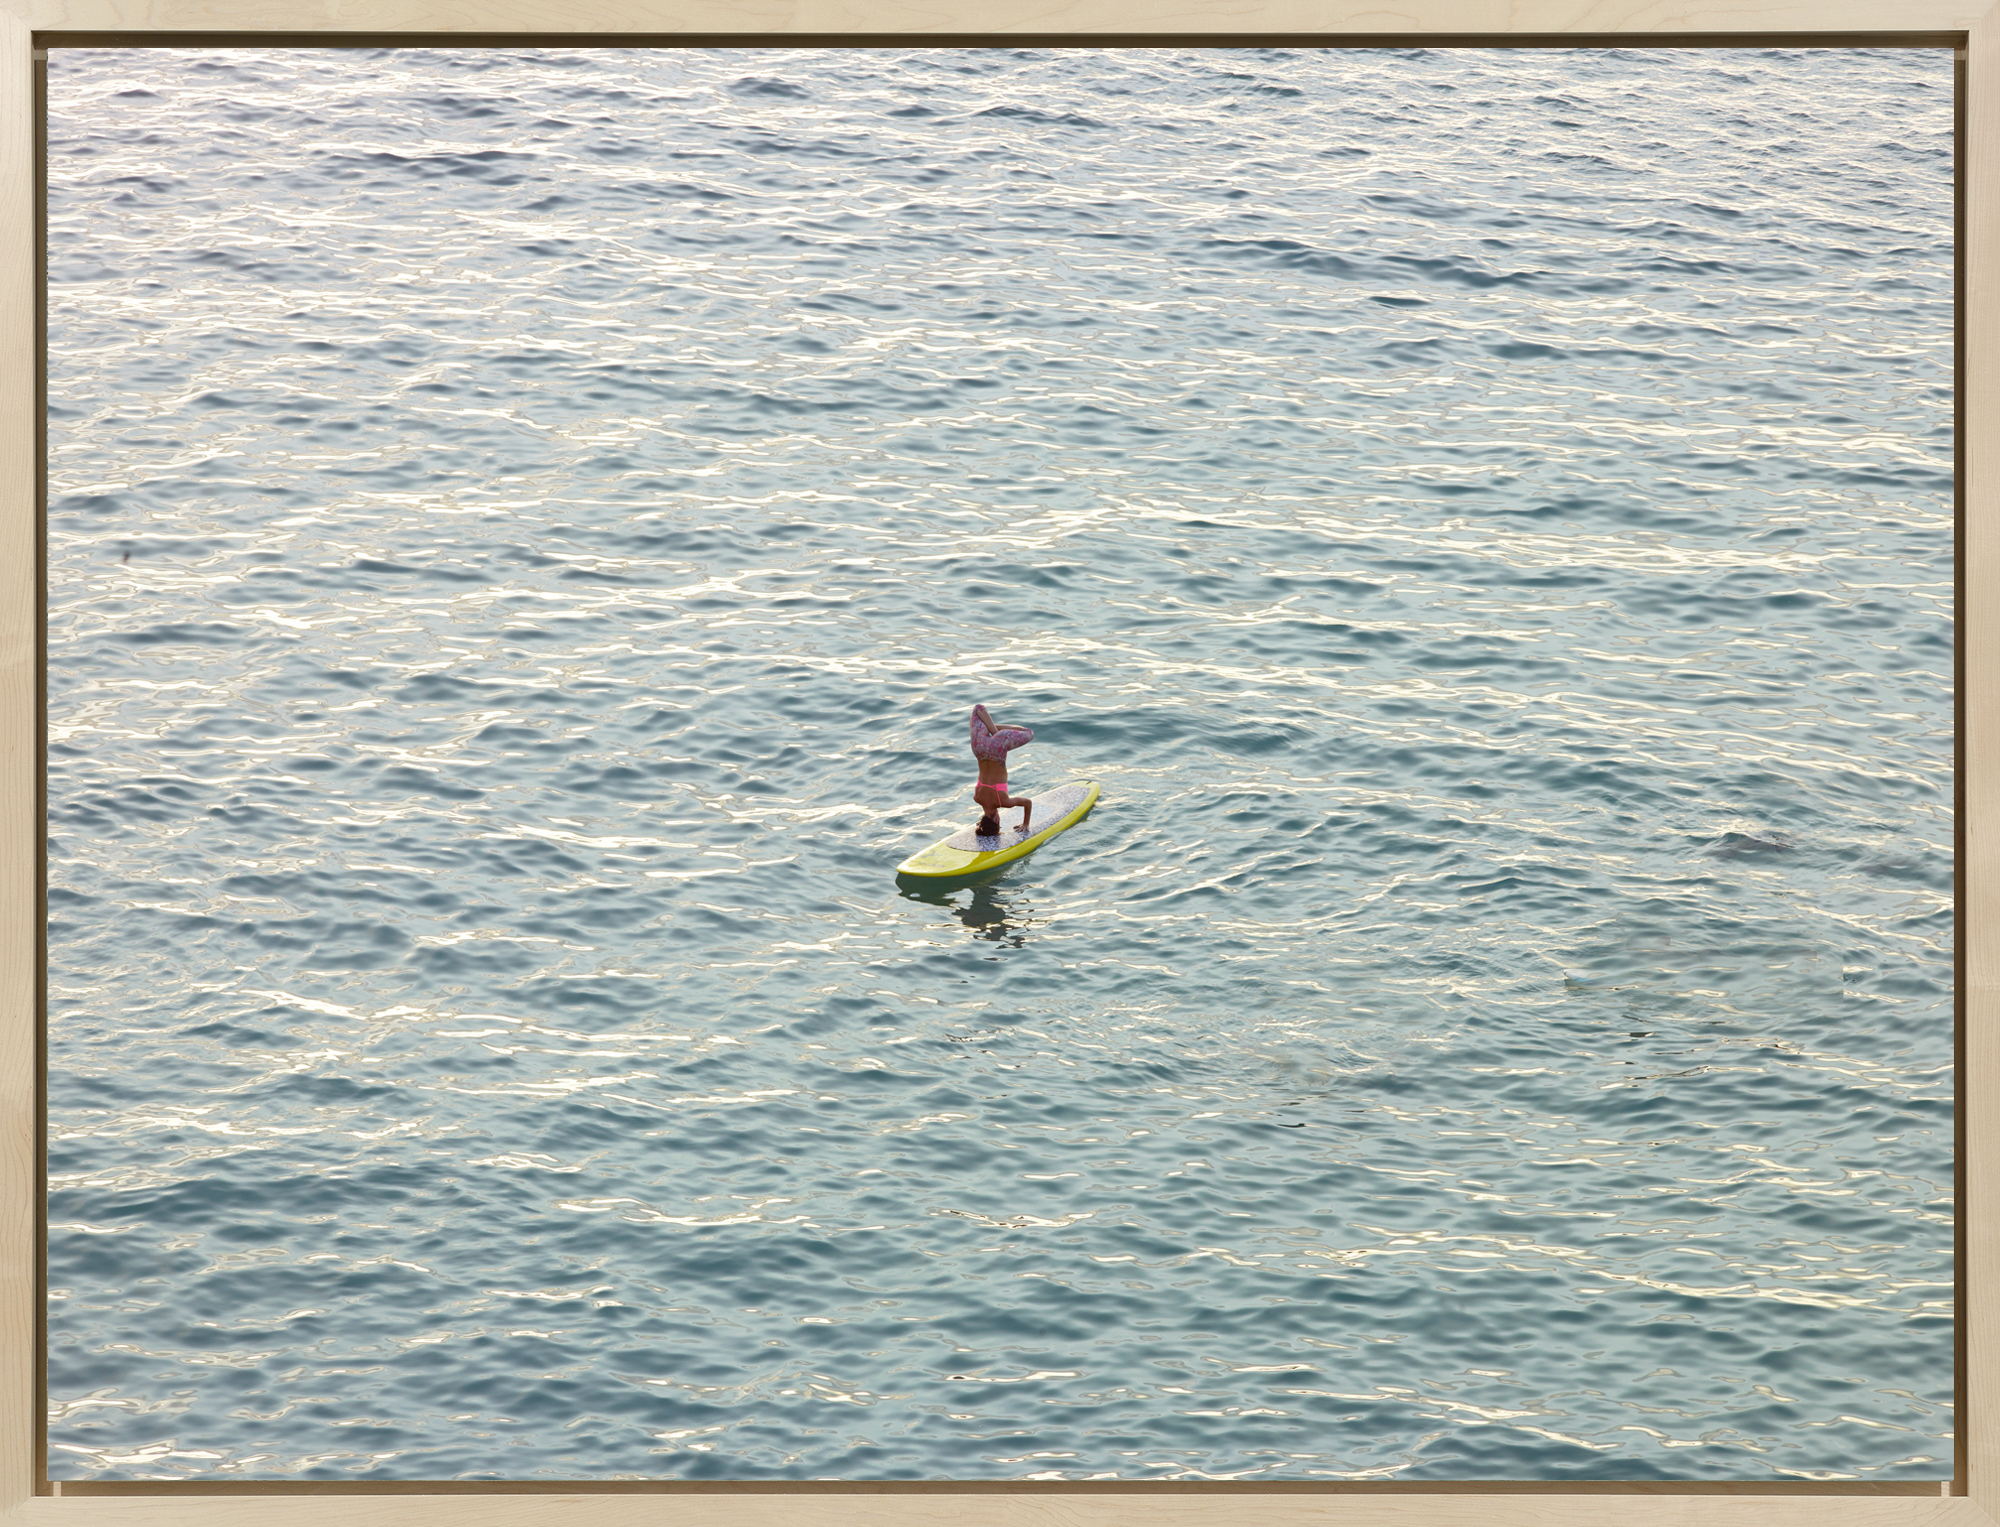 Color photograph of a woman doing a headstand atop a surfboard, afloat on a calm ocean surface.